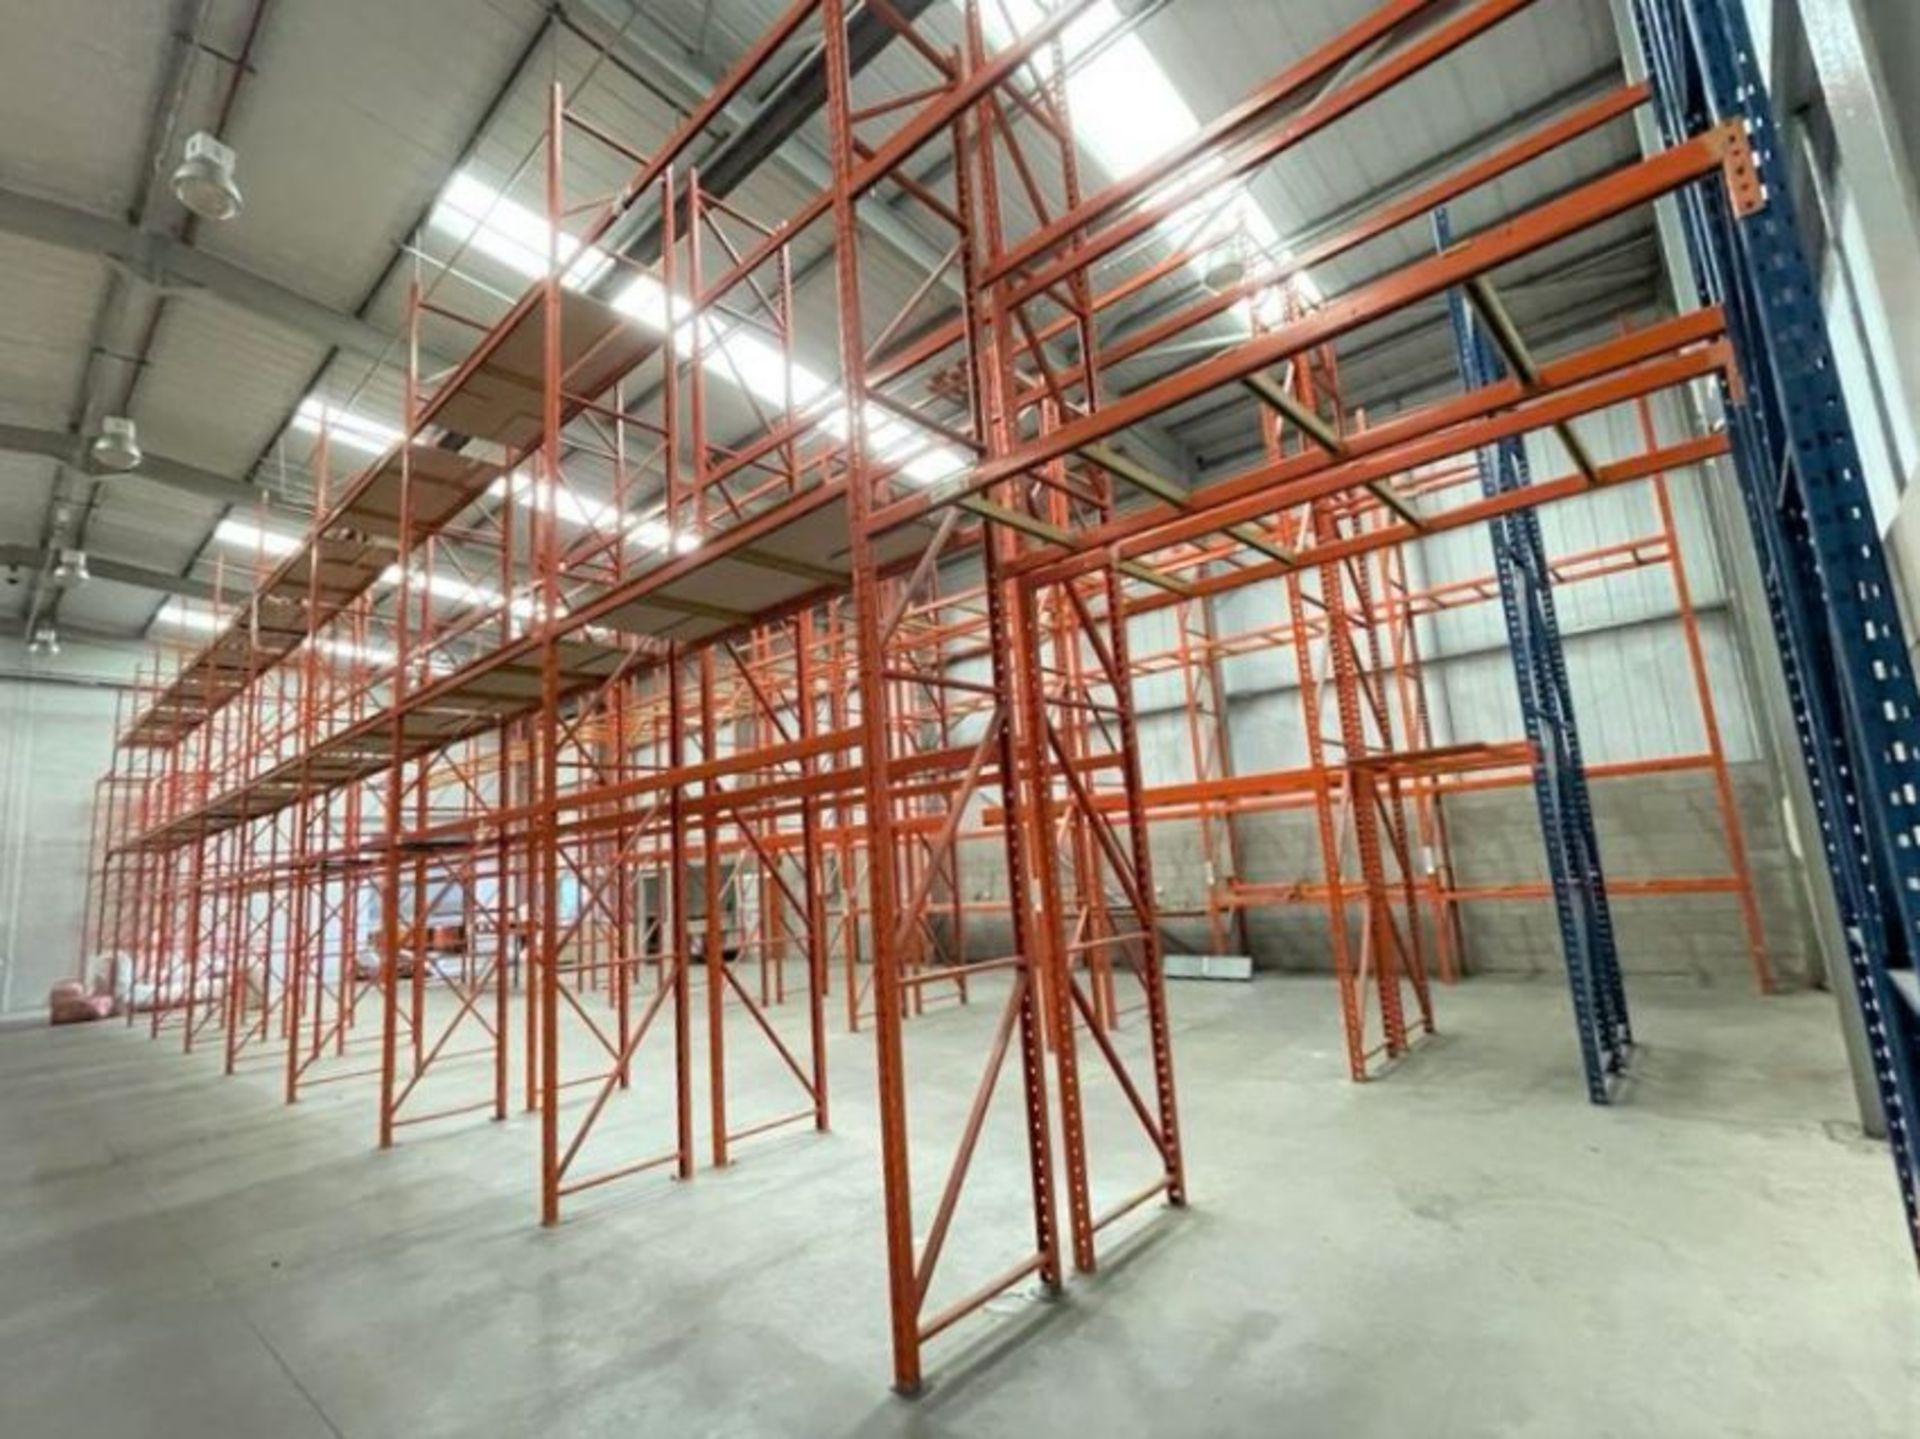 6 x Bays of RediRack Warehouse PALLET RACKING - Lot Includes 7 x Uprights and 24 x Crossbeams - - Image 4 of 5